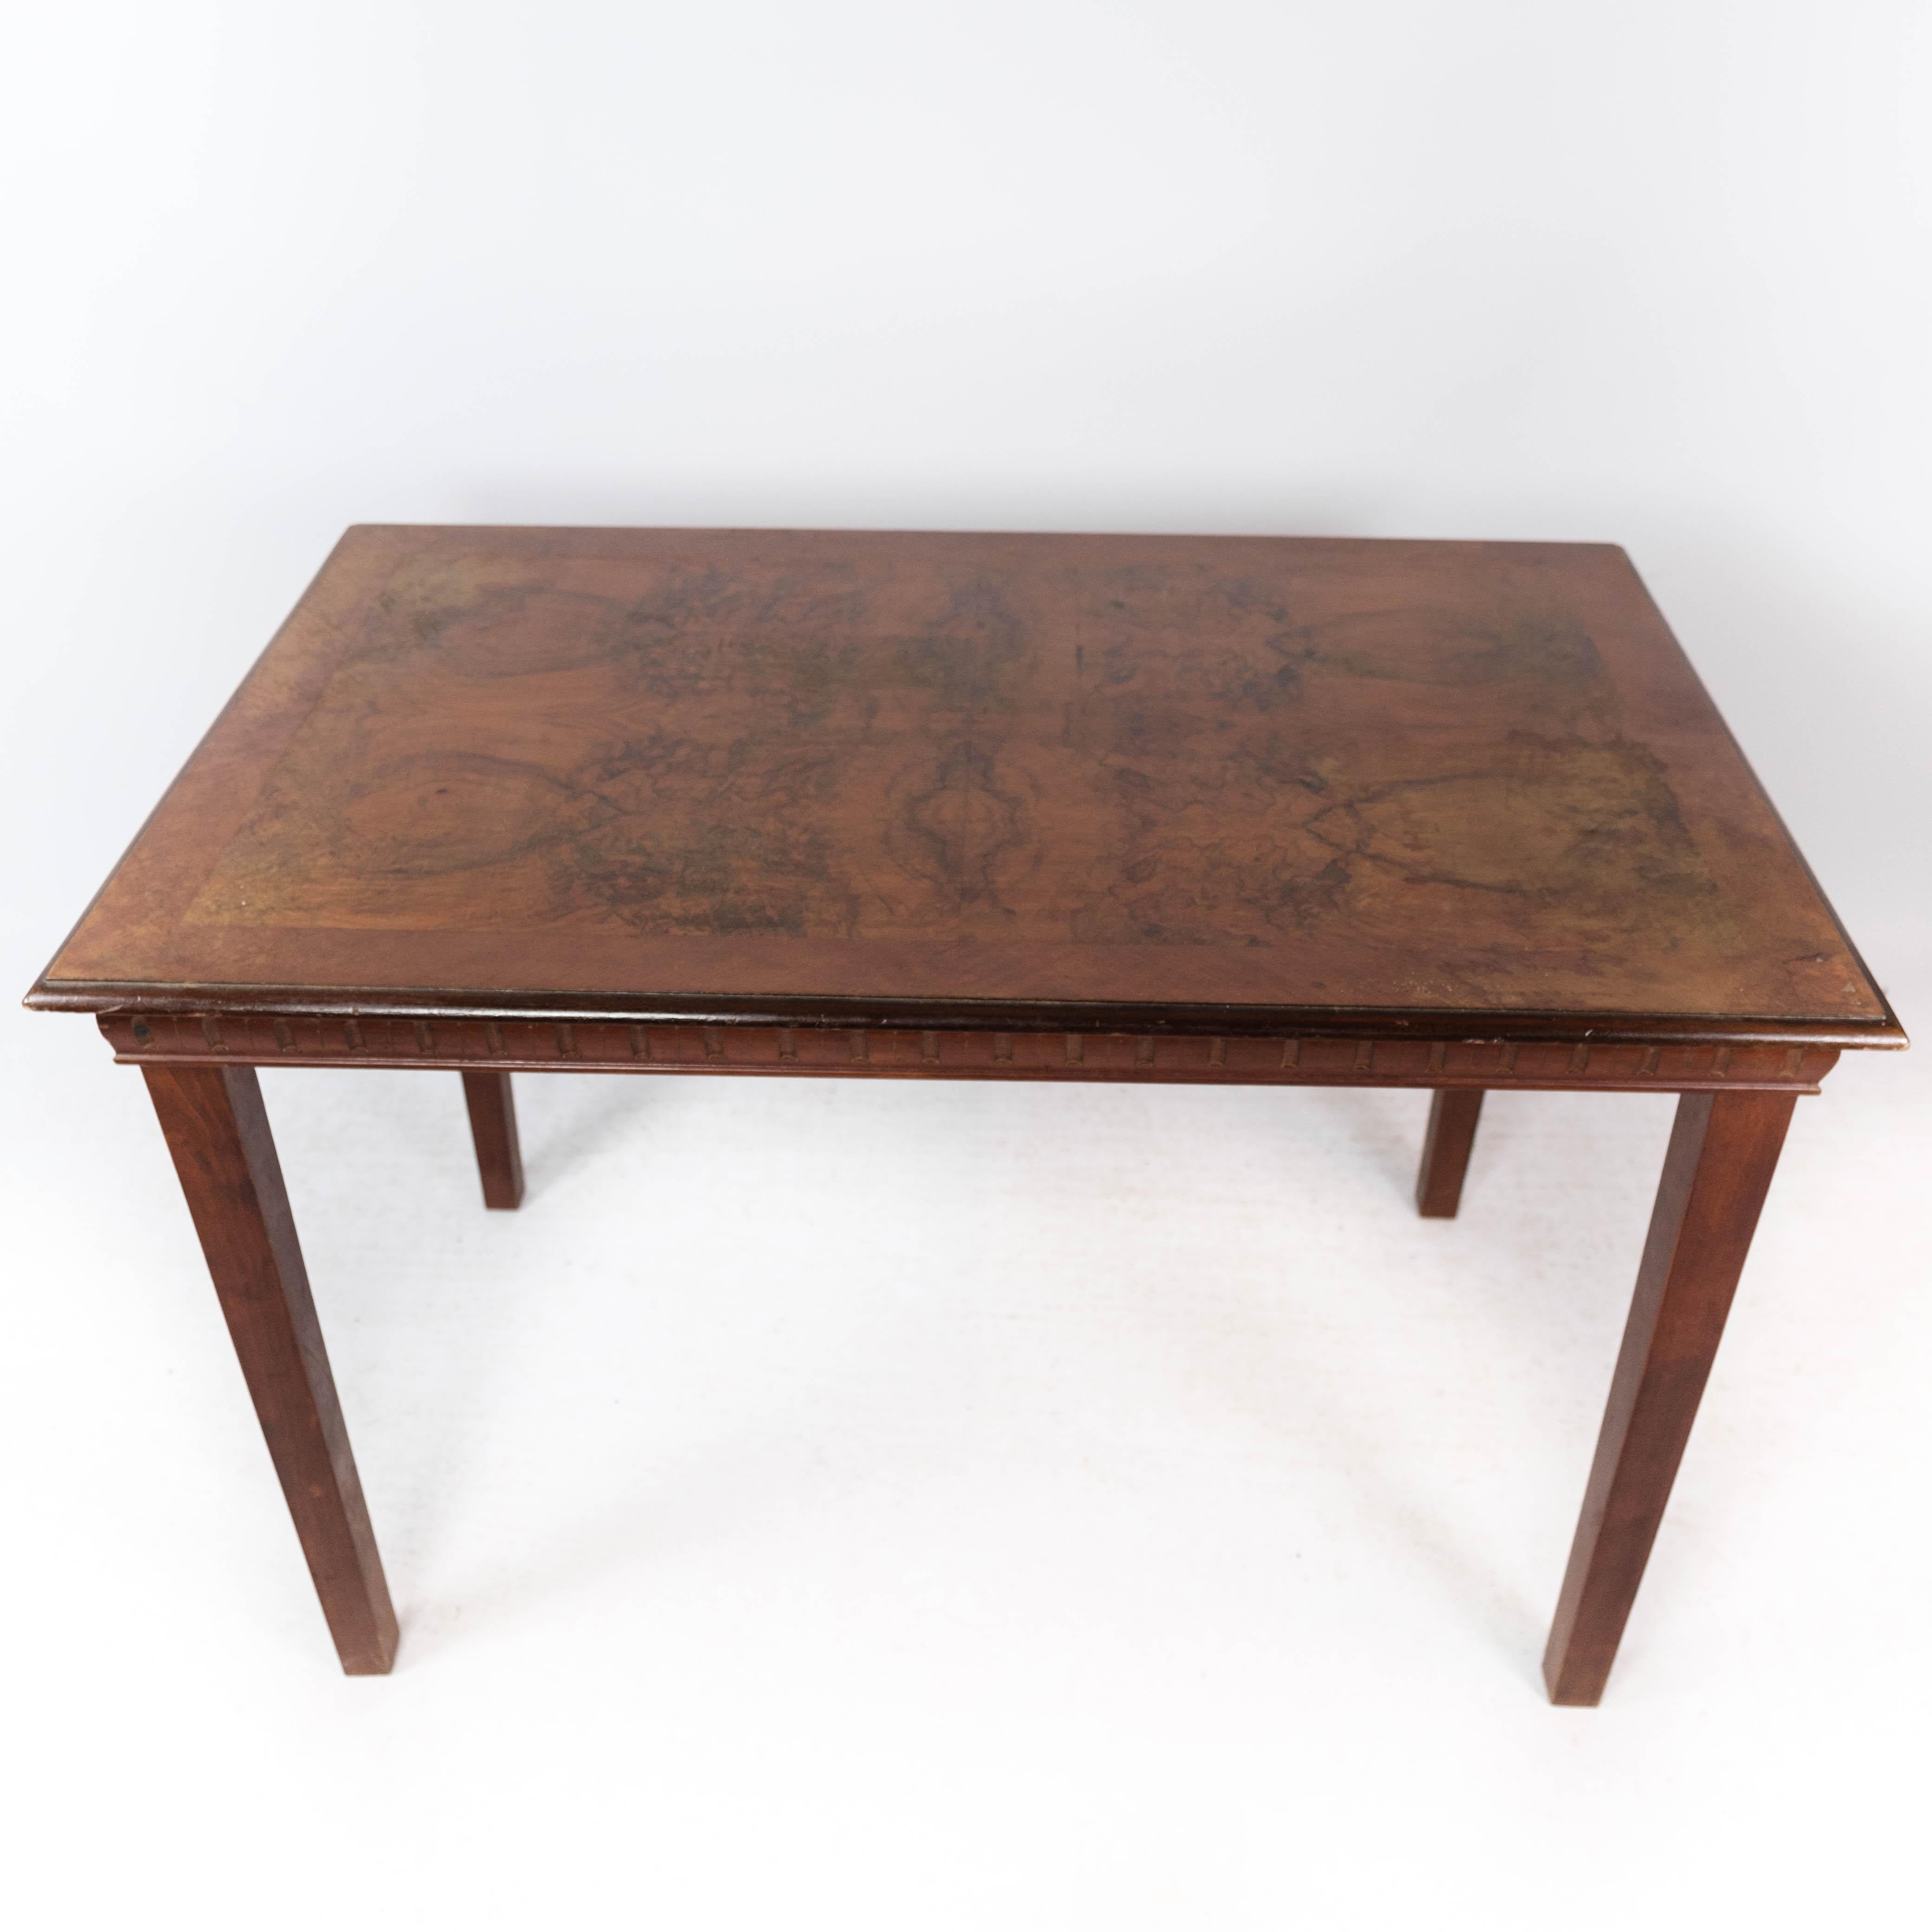 Dining and/or coffee table of walnut, in great antique condition from around 1890.